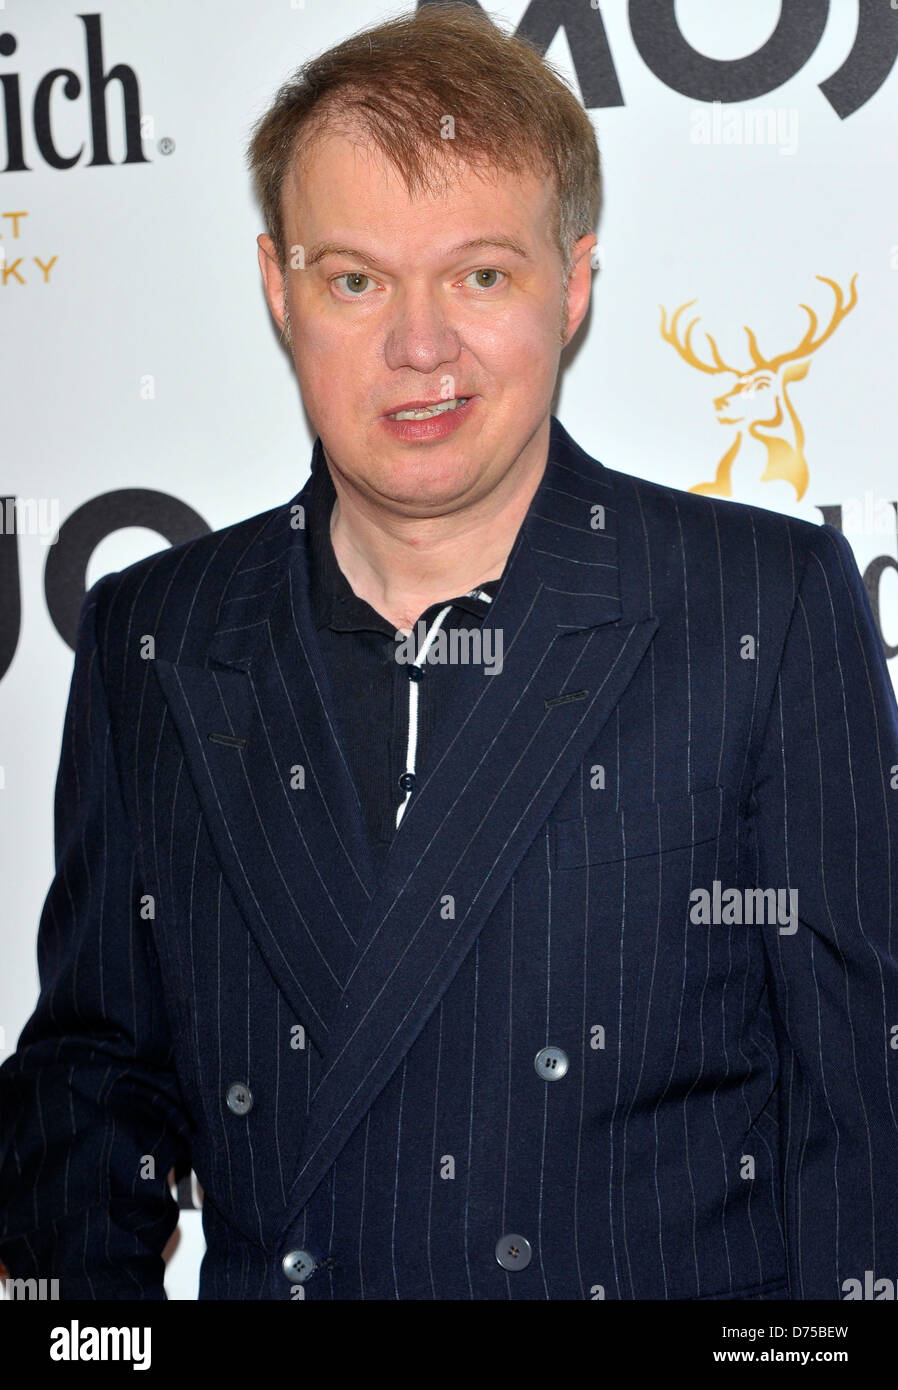 Edwyn Collins Glenfiddich Mojo Honours List 2011 Awards Ceremony, held at The Brewery - Arrivals London, England - 21.07.11 Stock Photo